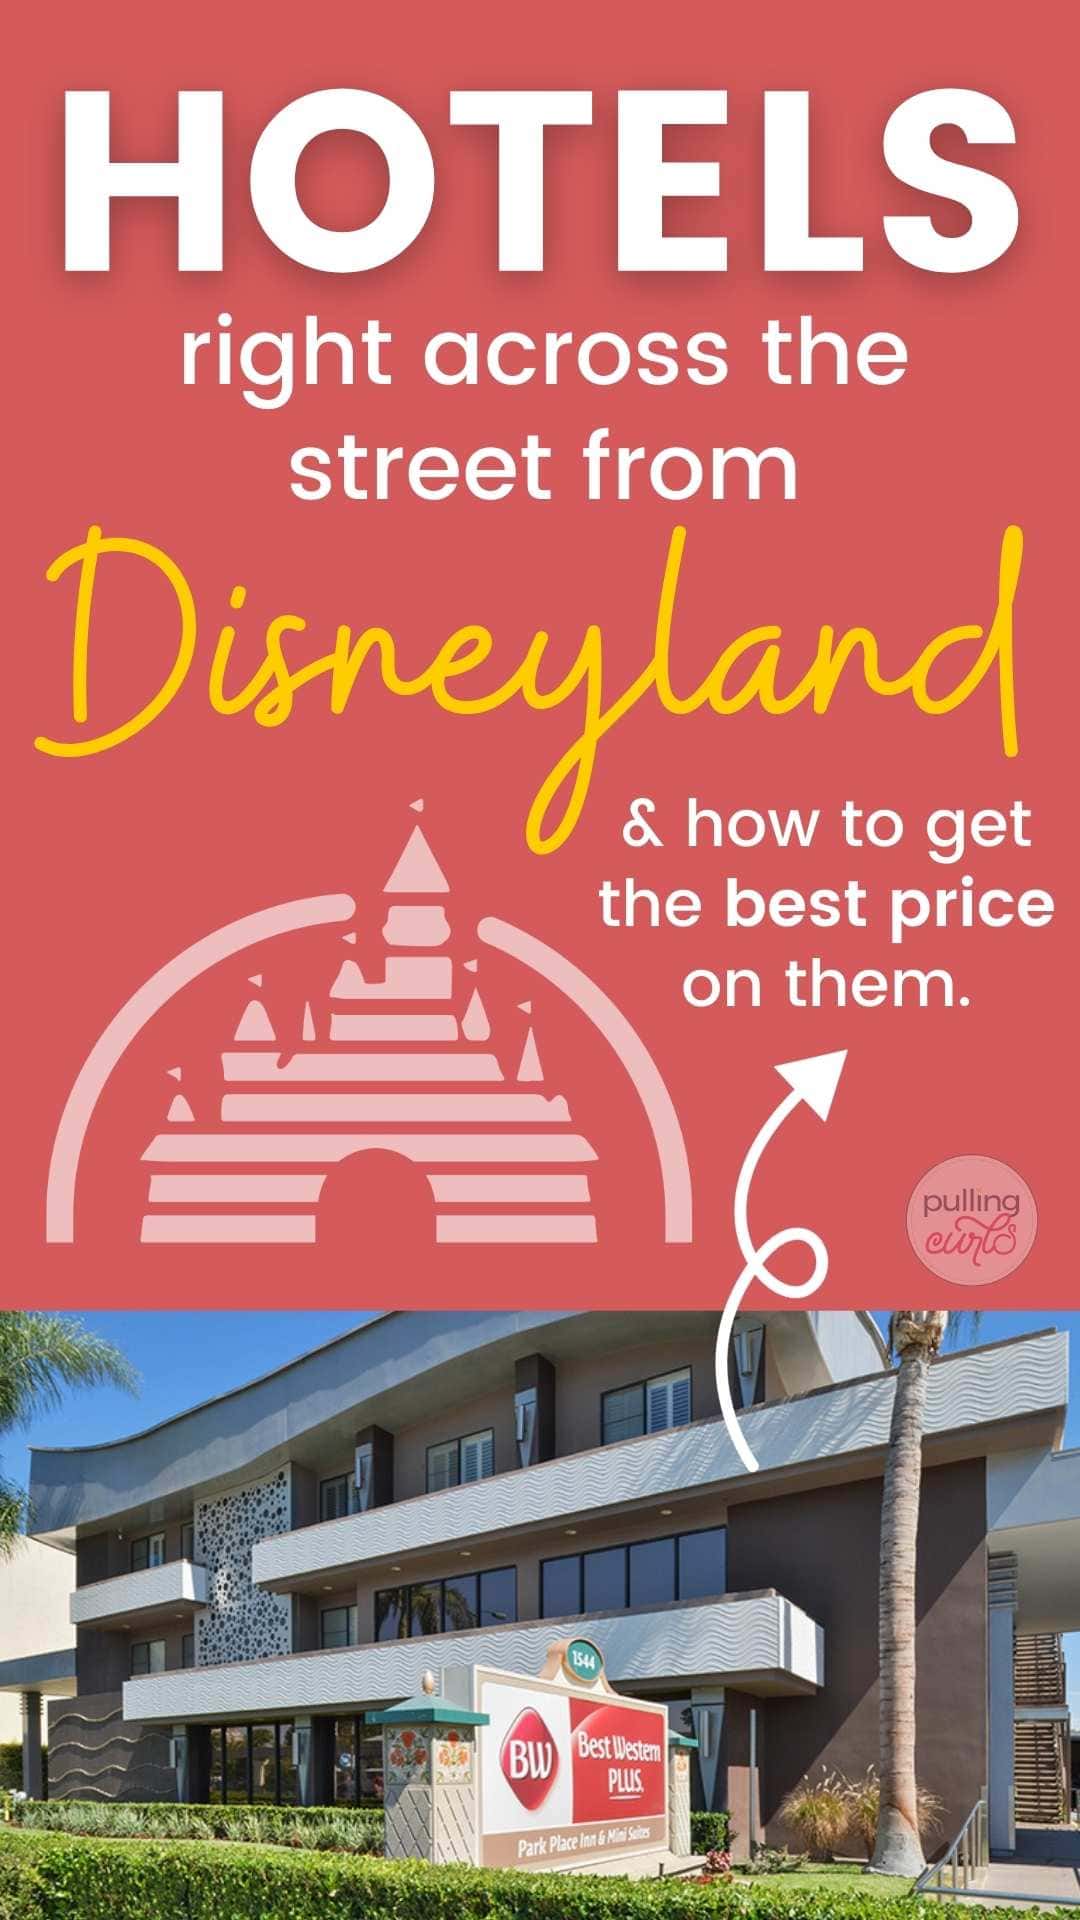 Being closed to Disneyland is a HUGE perk. I totally agree. So, today I am going to share the top 10 hotels across the street from Disneyland. I will put them in order or closest to farthest (the farthest is about an 8-10 minute walk to the security gate). via @pullingcurls